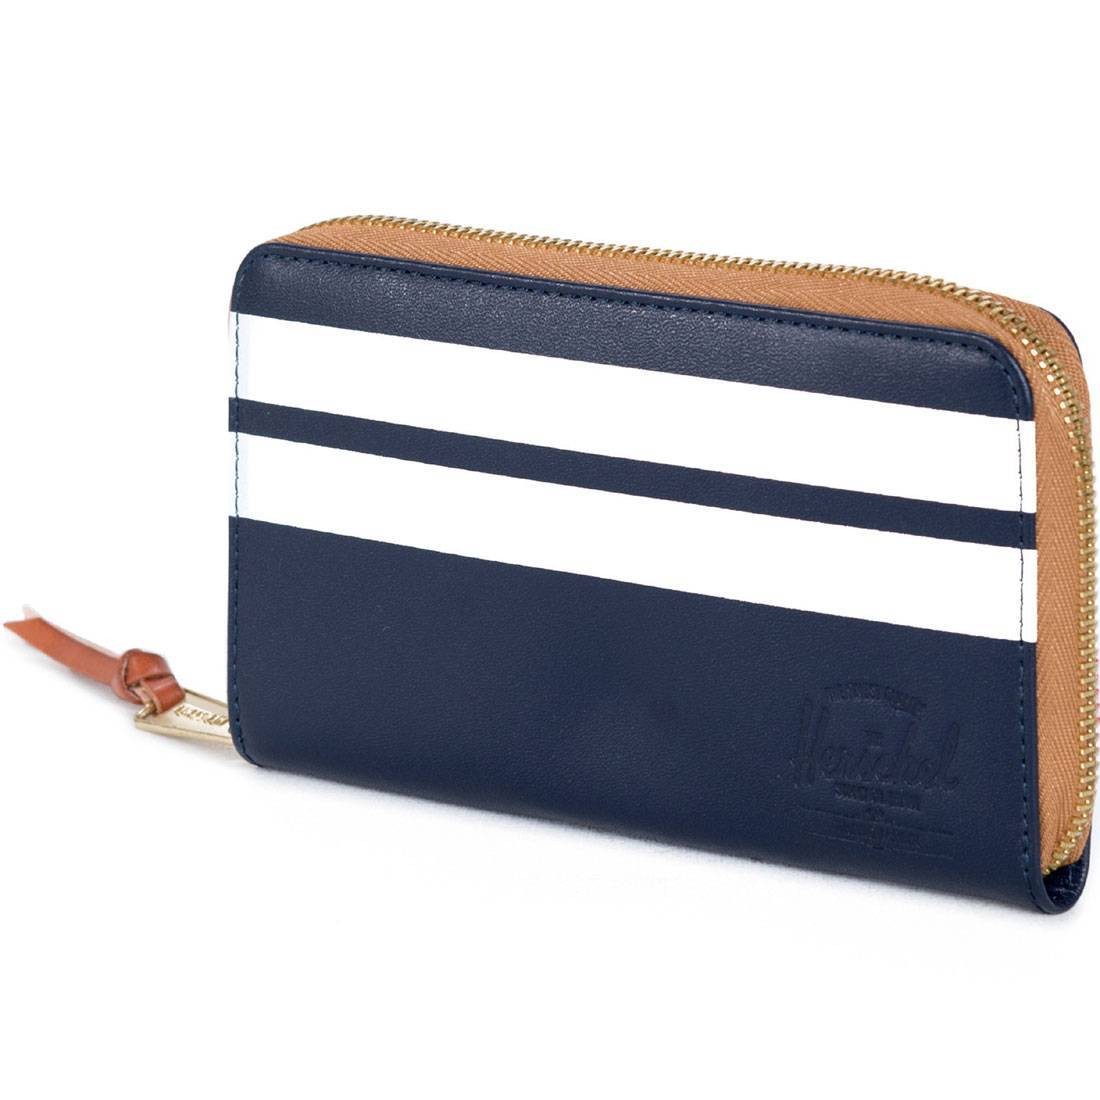 Herschel Supply Co Thomas Leather Wallet - Offset (blue / peacock)